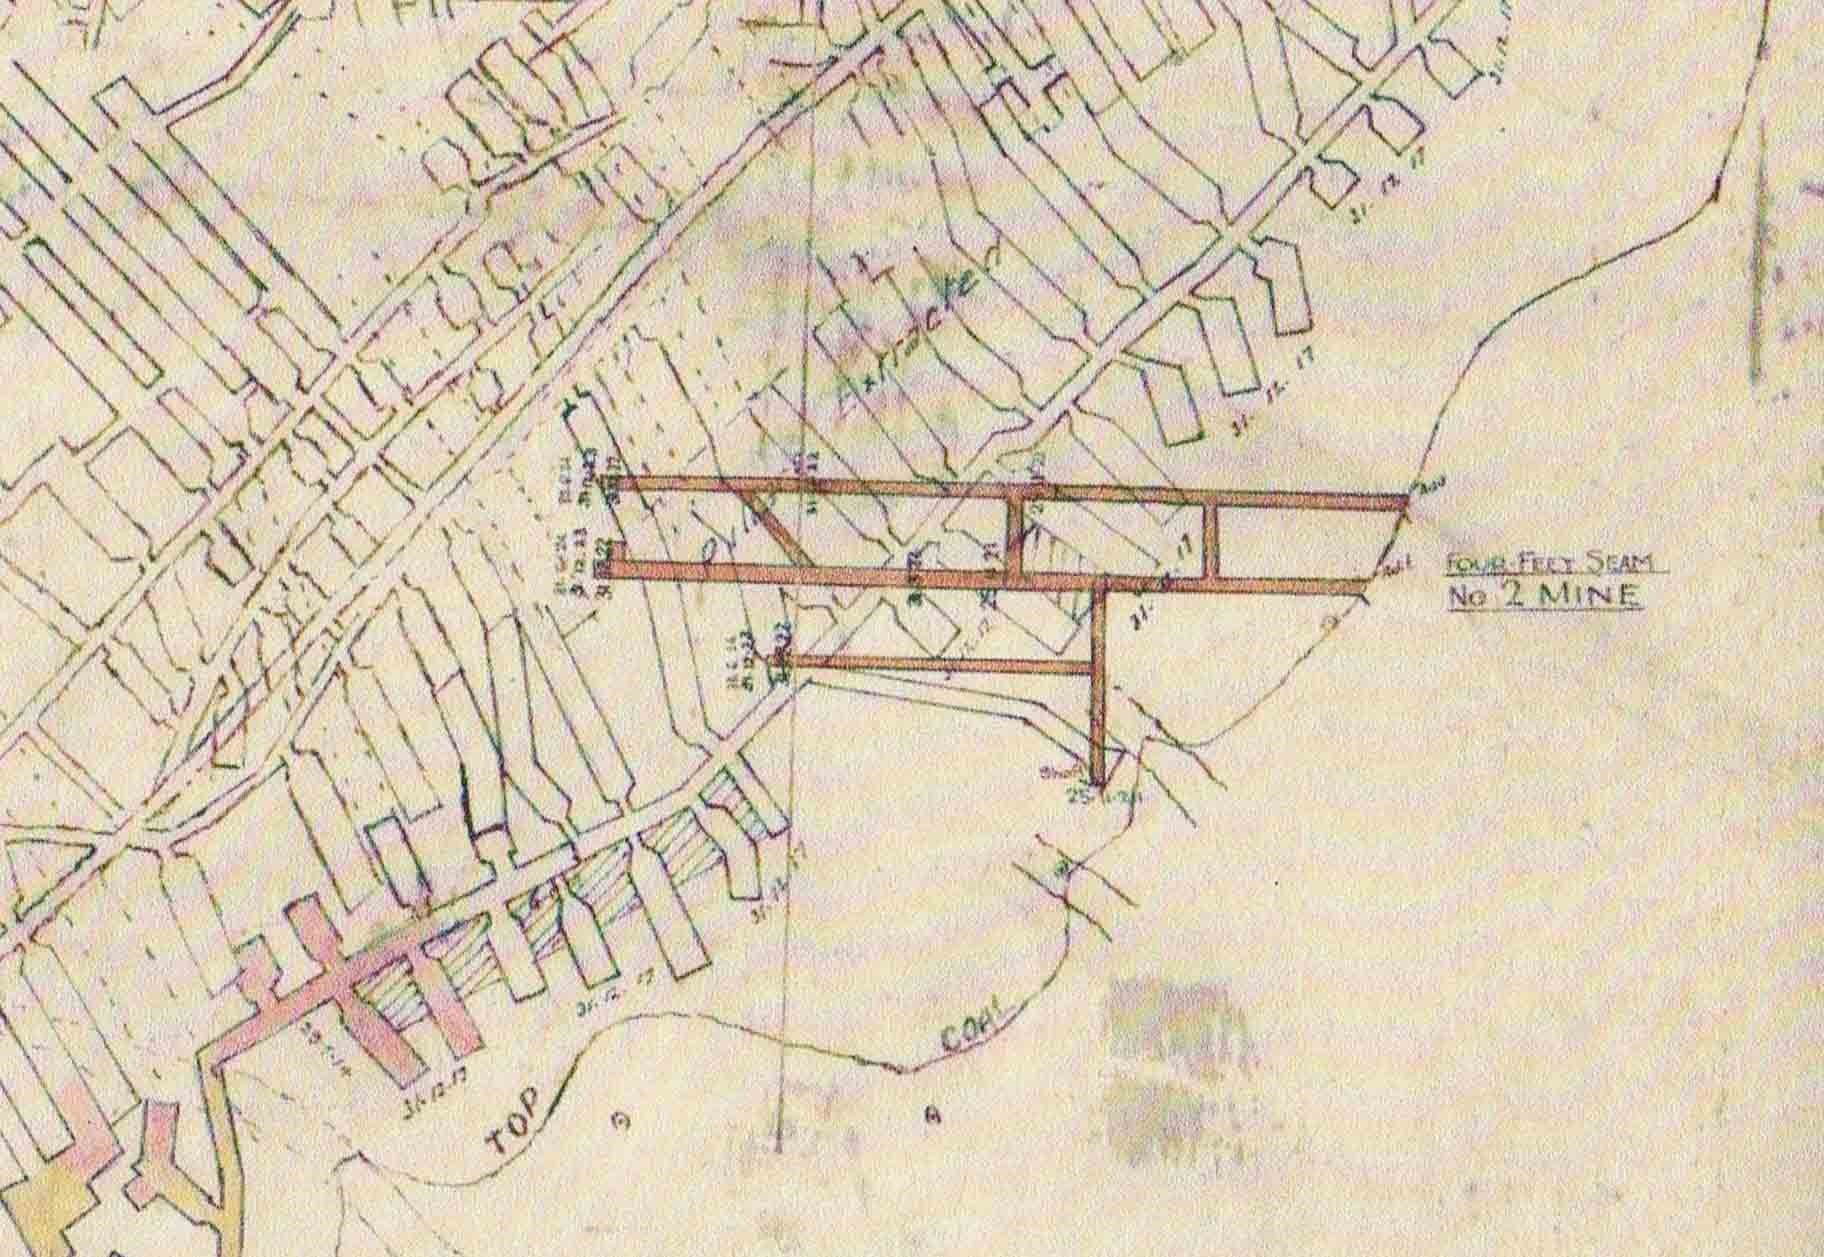 Corrimal Balgownie No. 2 Colliery extent of workings under Brokers Nose Mine